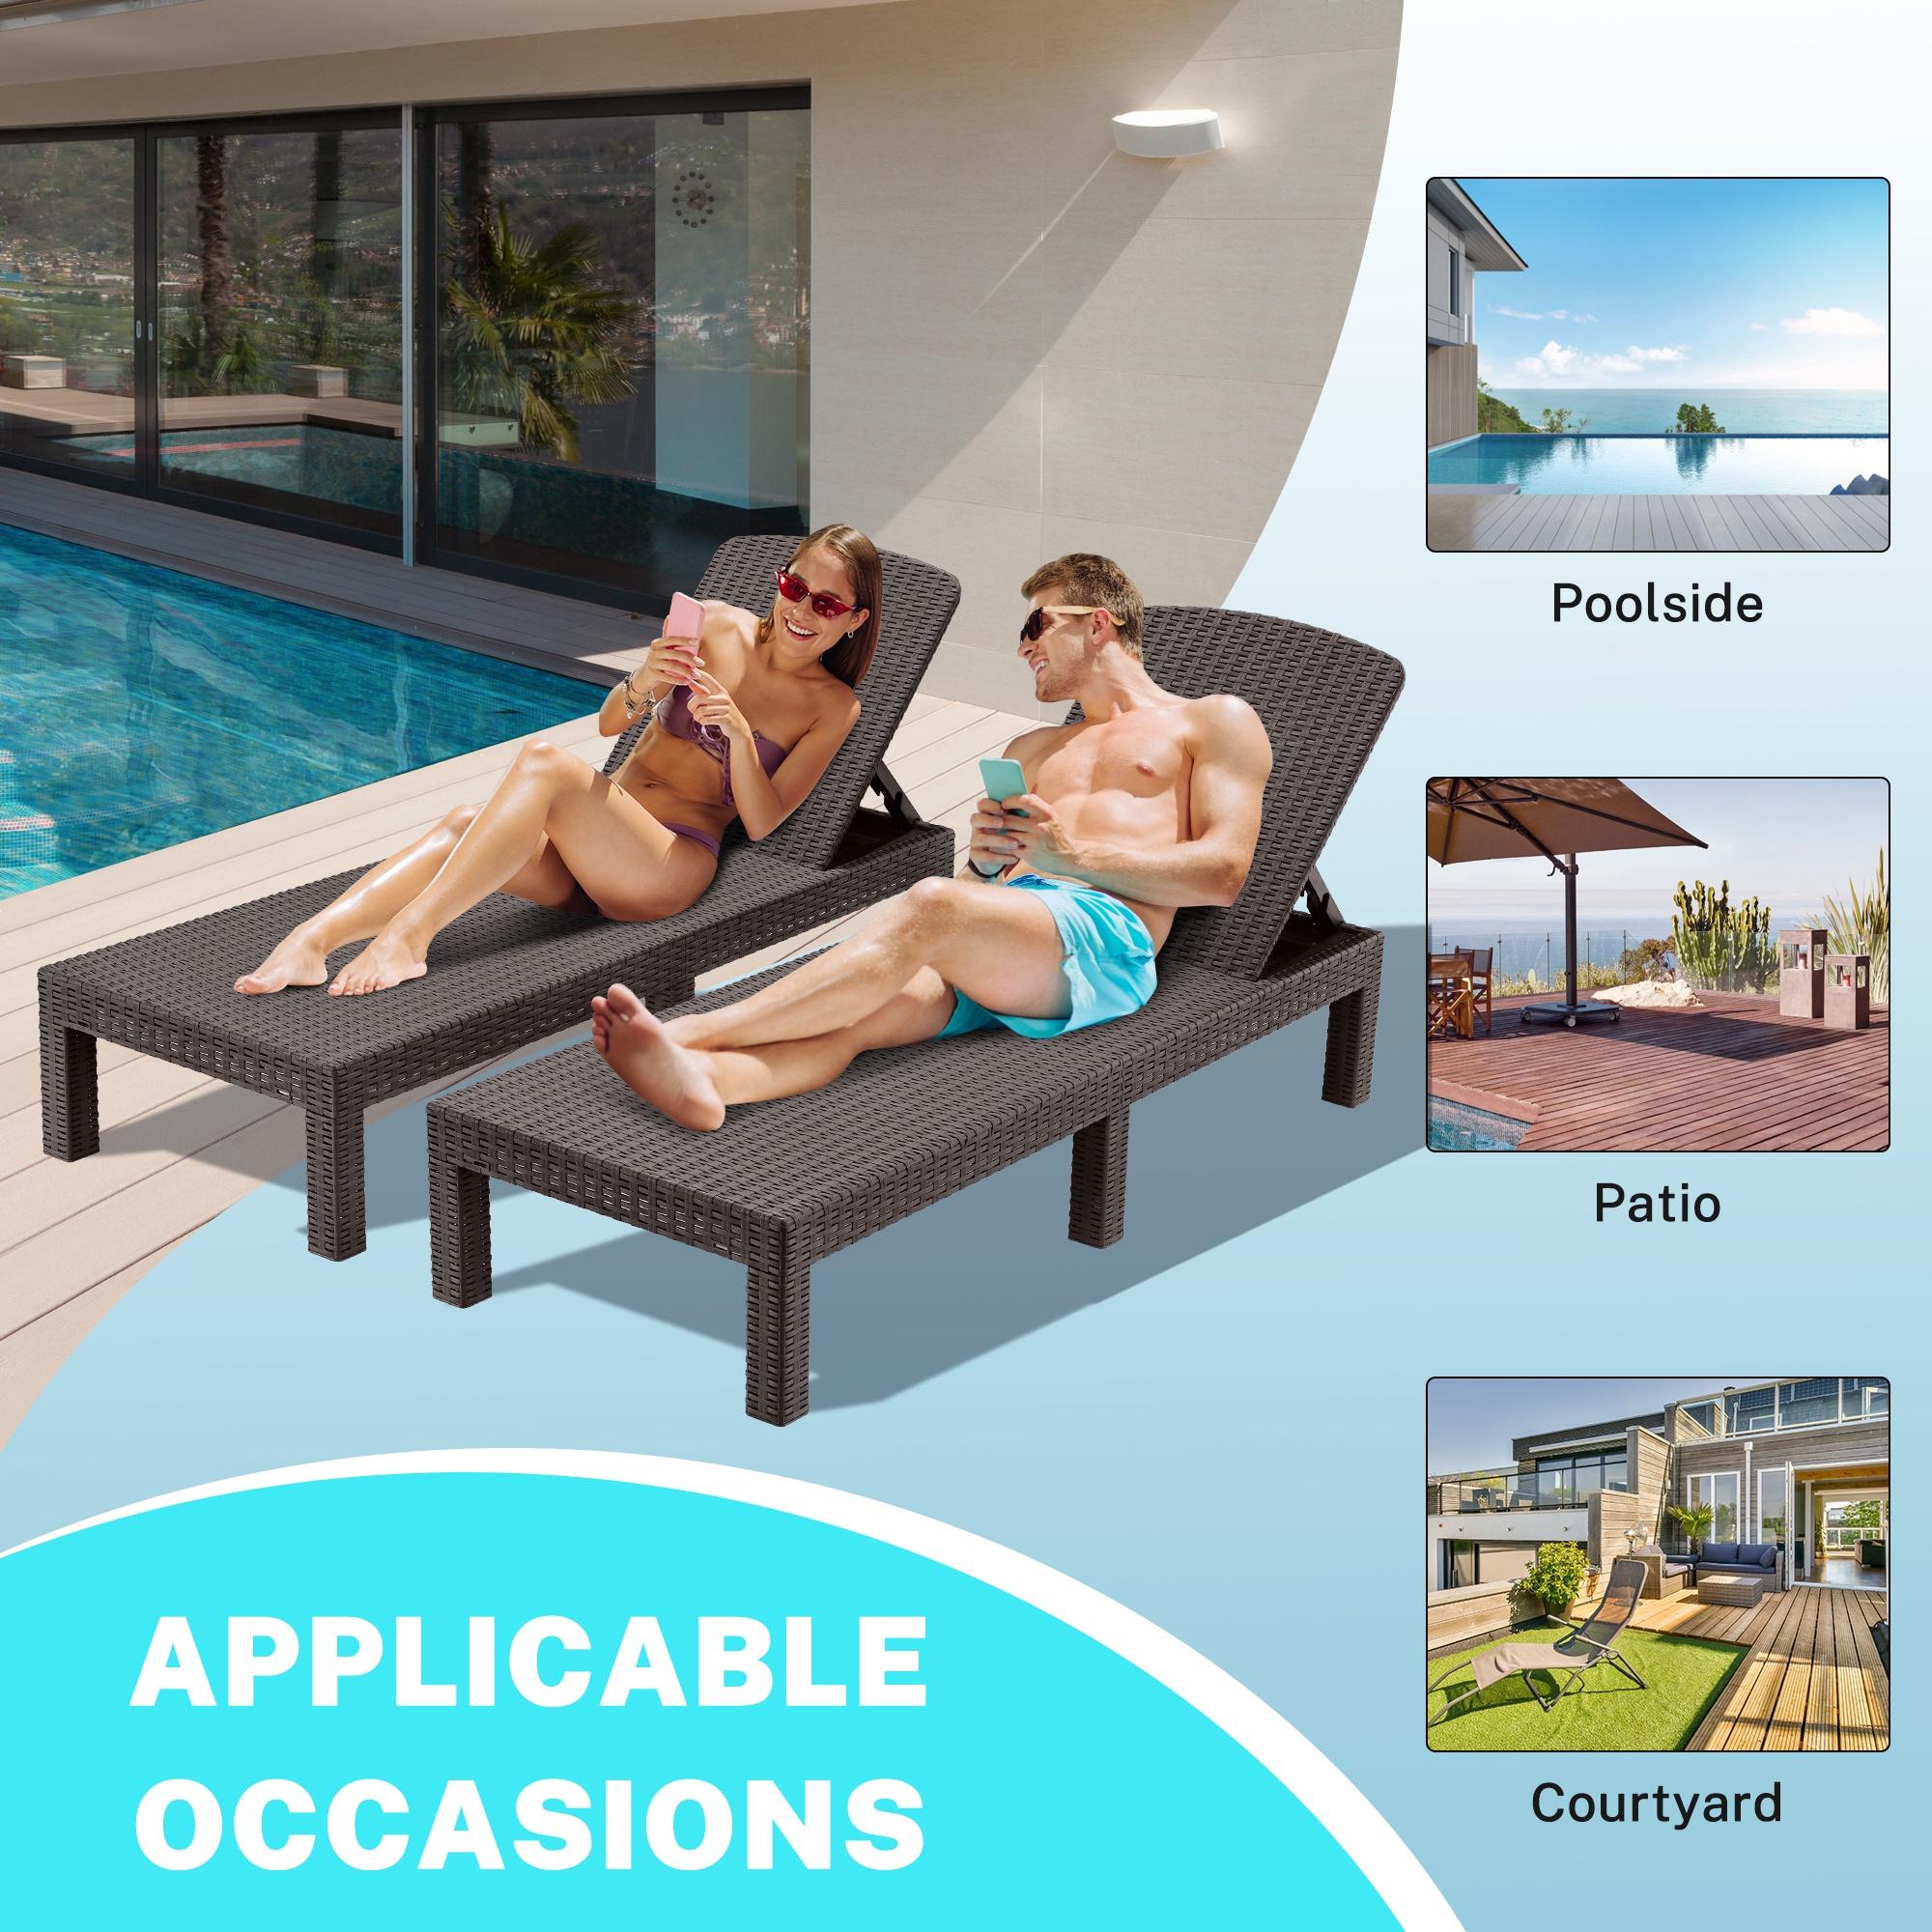 2 Piece Outdoor Chaise Lounge Set, PP Resin Adjustable Reclining Lounge Chairs, Patio Sun Loungers for Poolside Porch Backyard Garden, Espresso - image 4 of 10